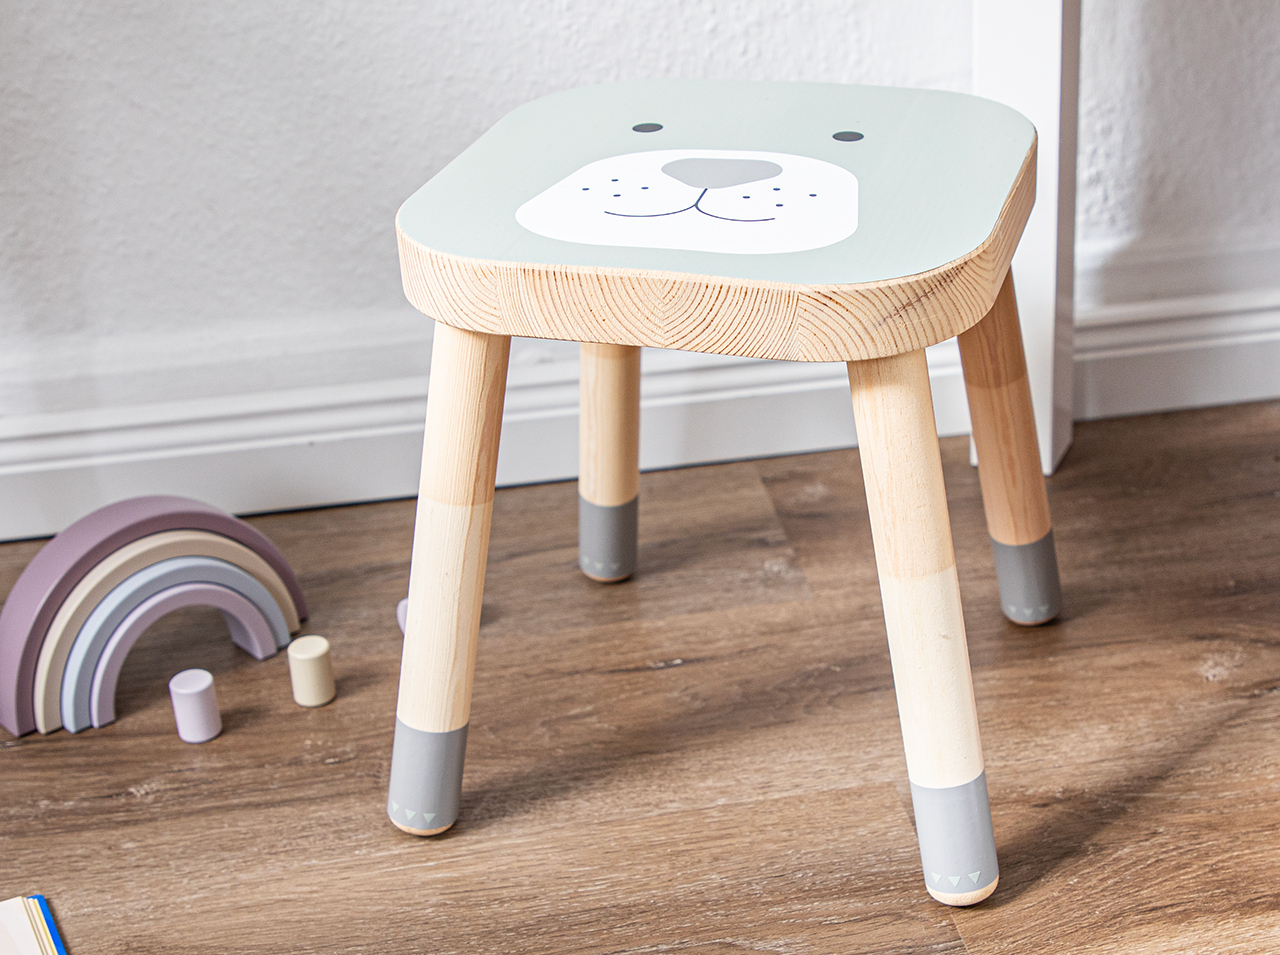 Low stool for children with friendly animal face on the seat.